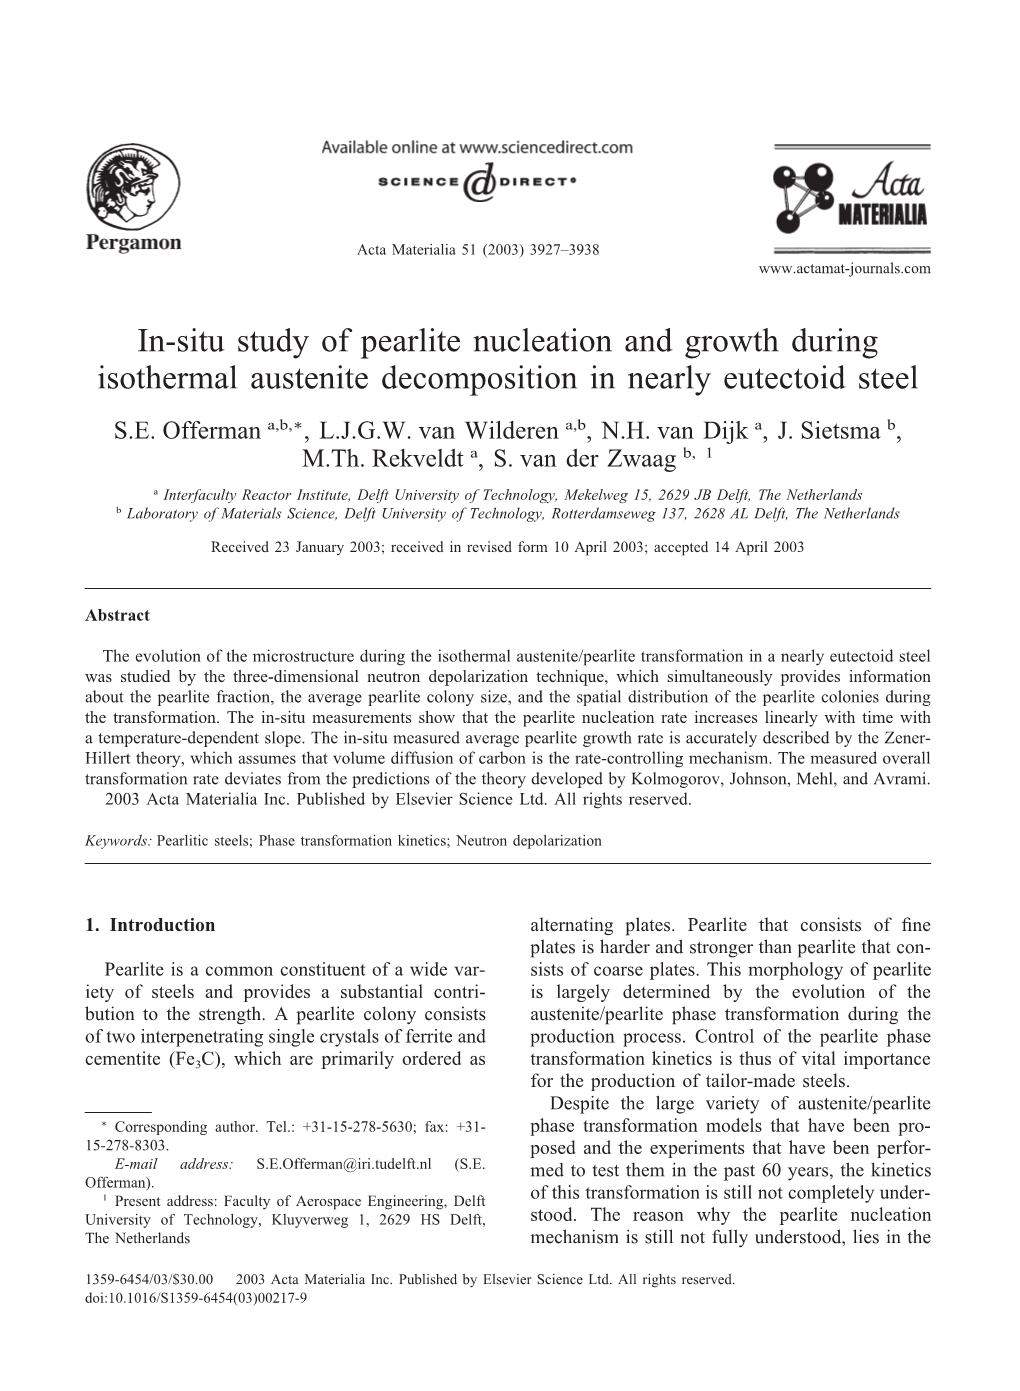 In-Situ Study of Pearlite Nucleation and Growth During Isothermal Austenite Decomposition in Nearly Eutectoid Steel S.E